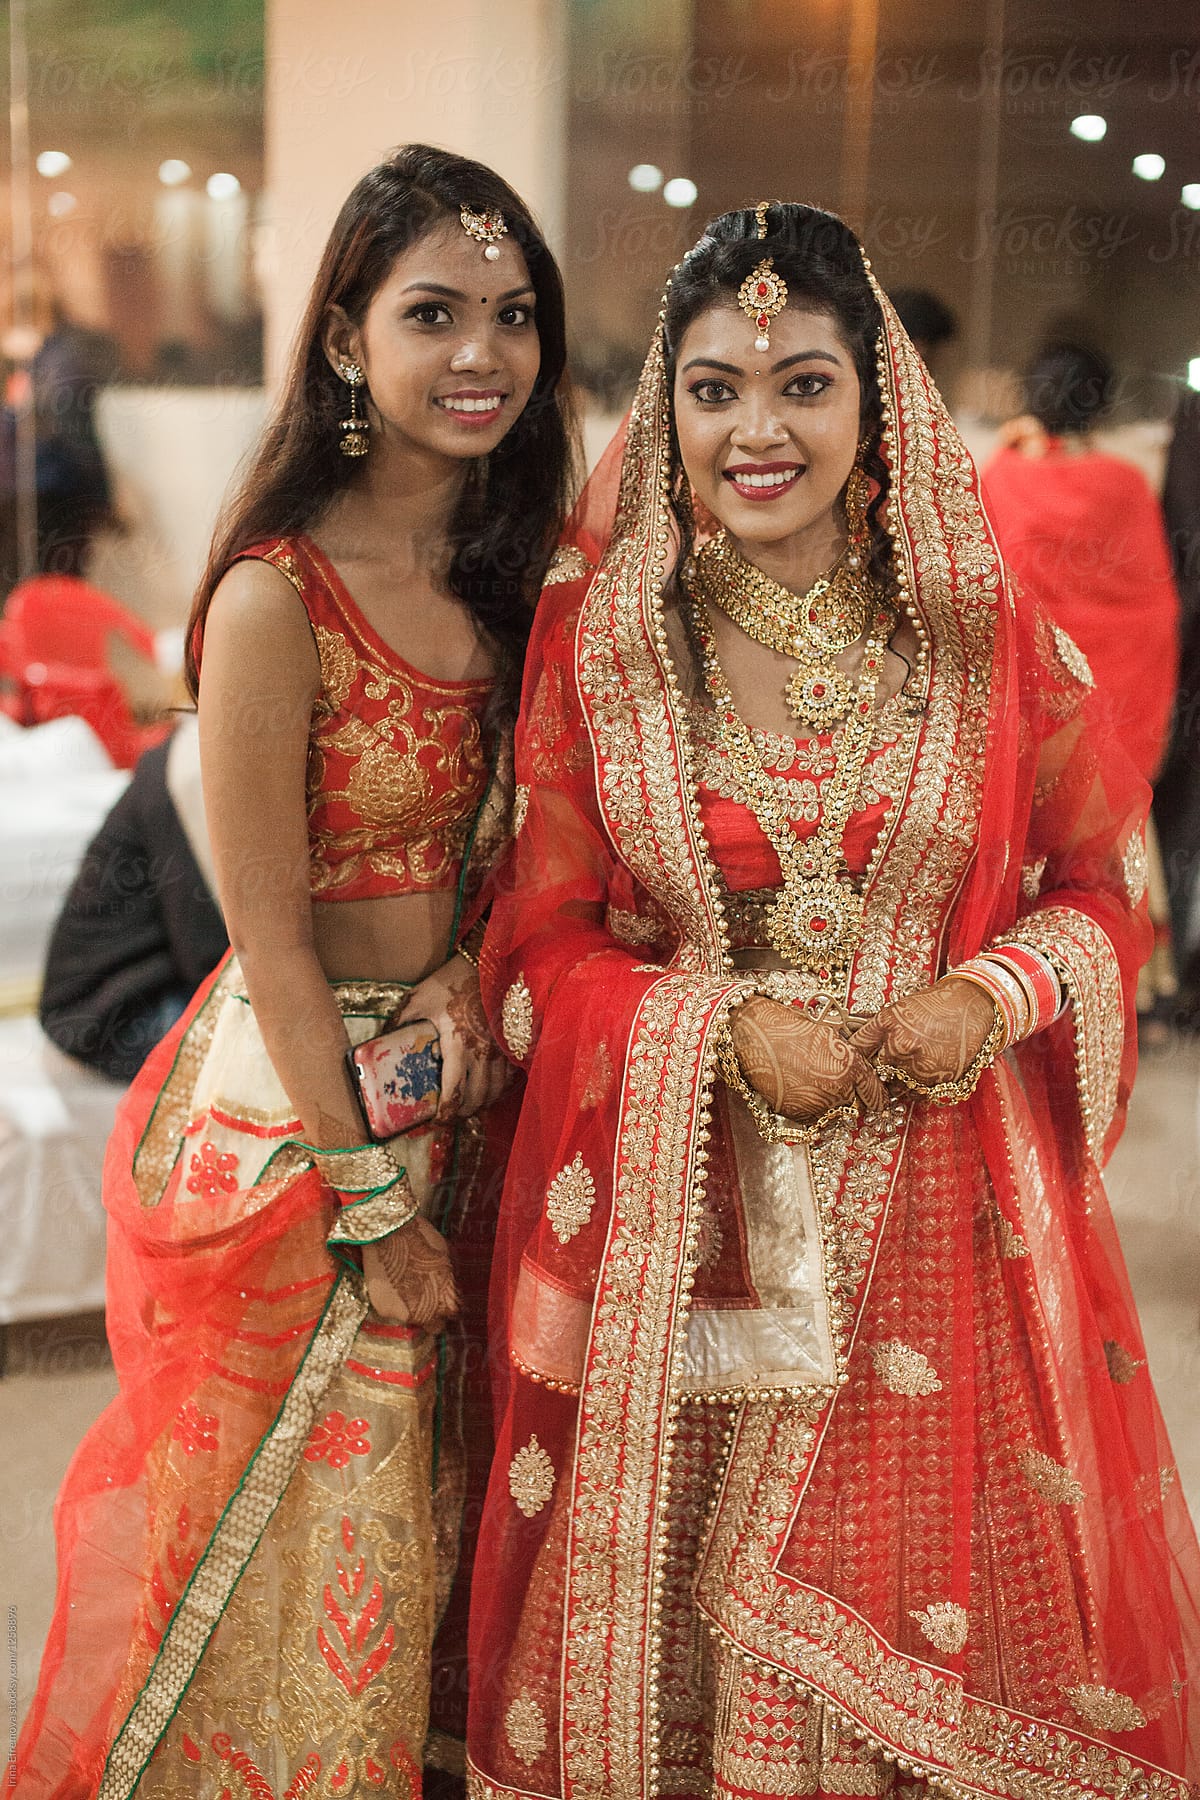 Indian Bride with her sister